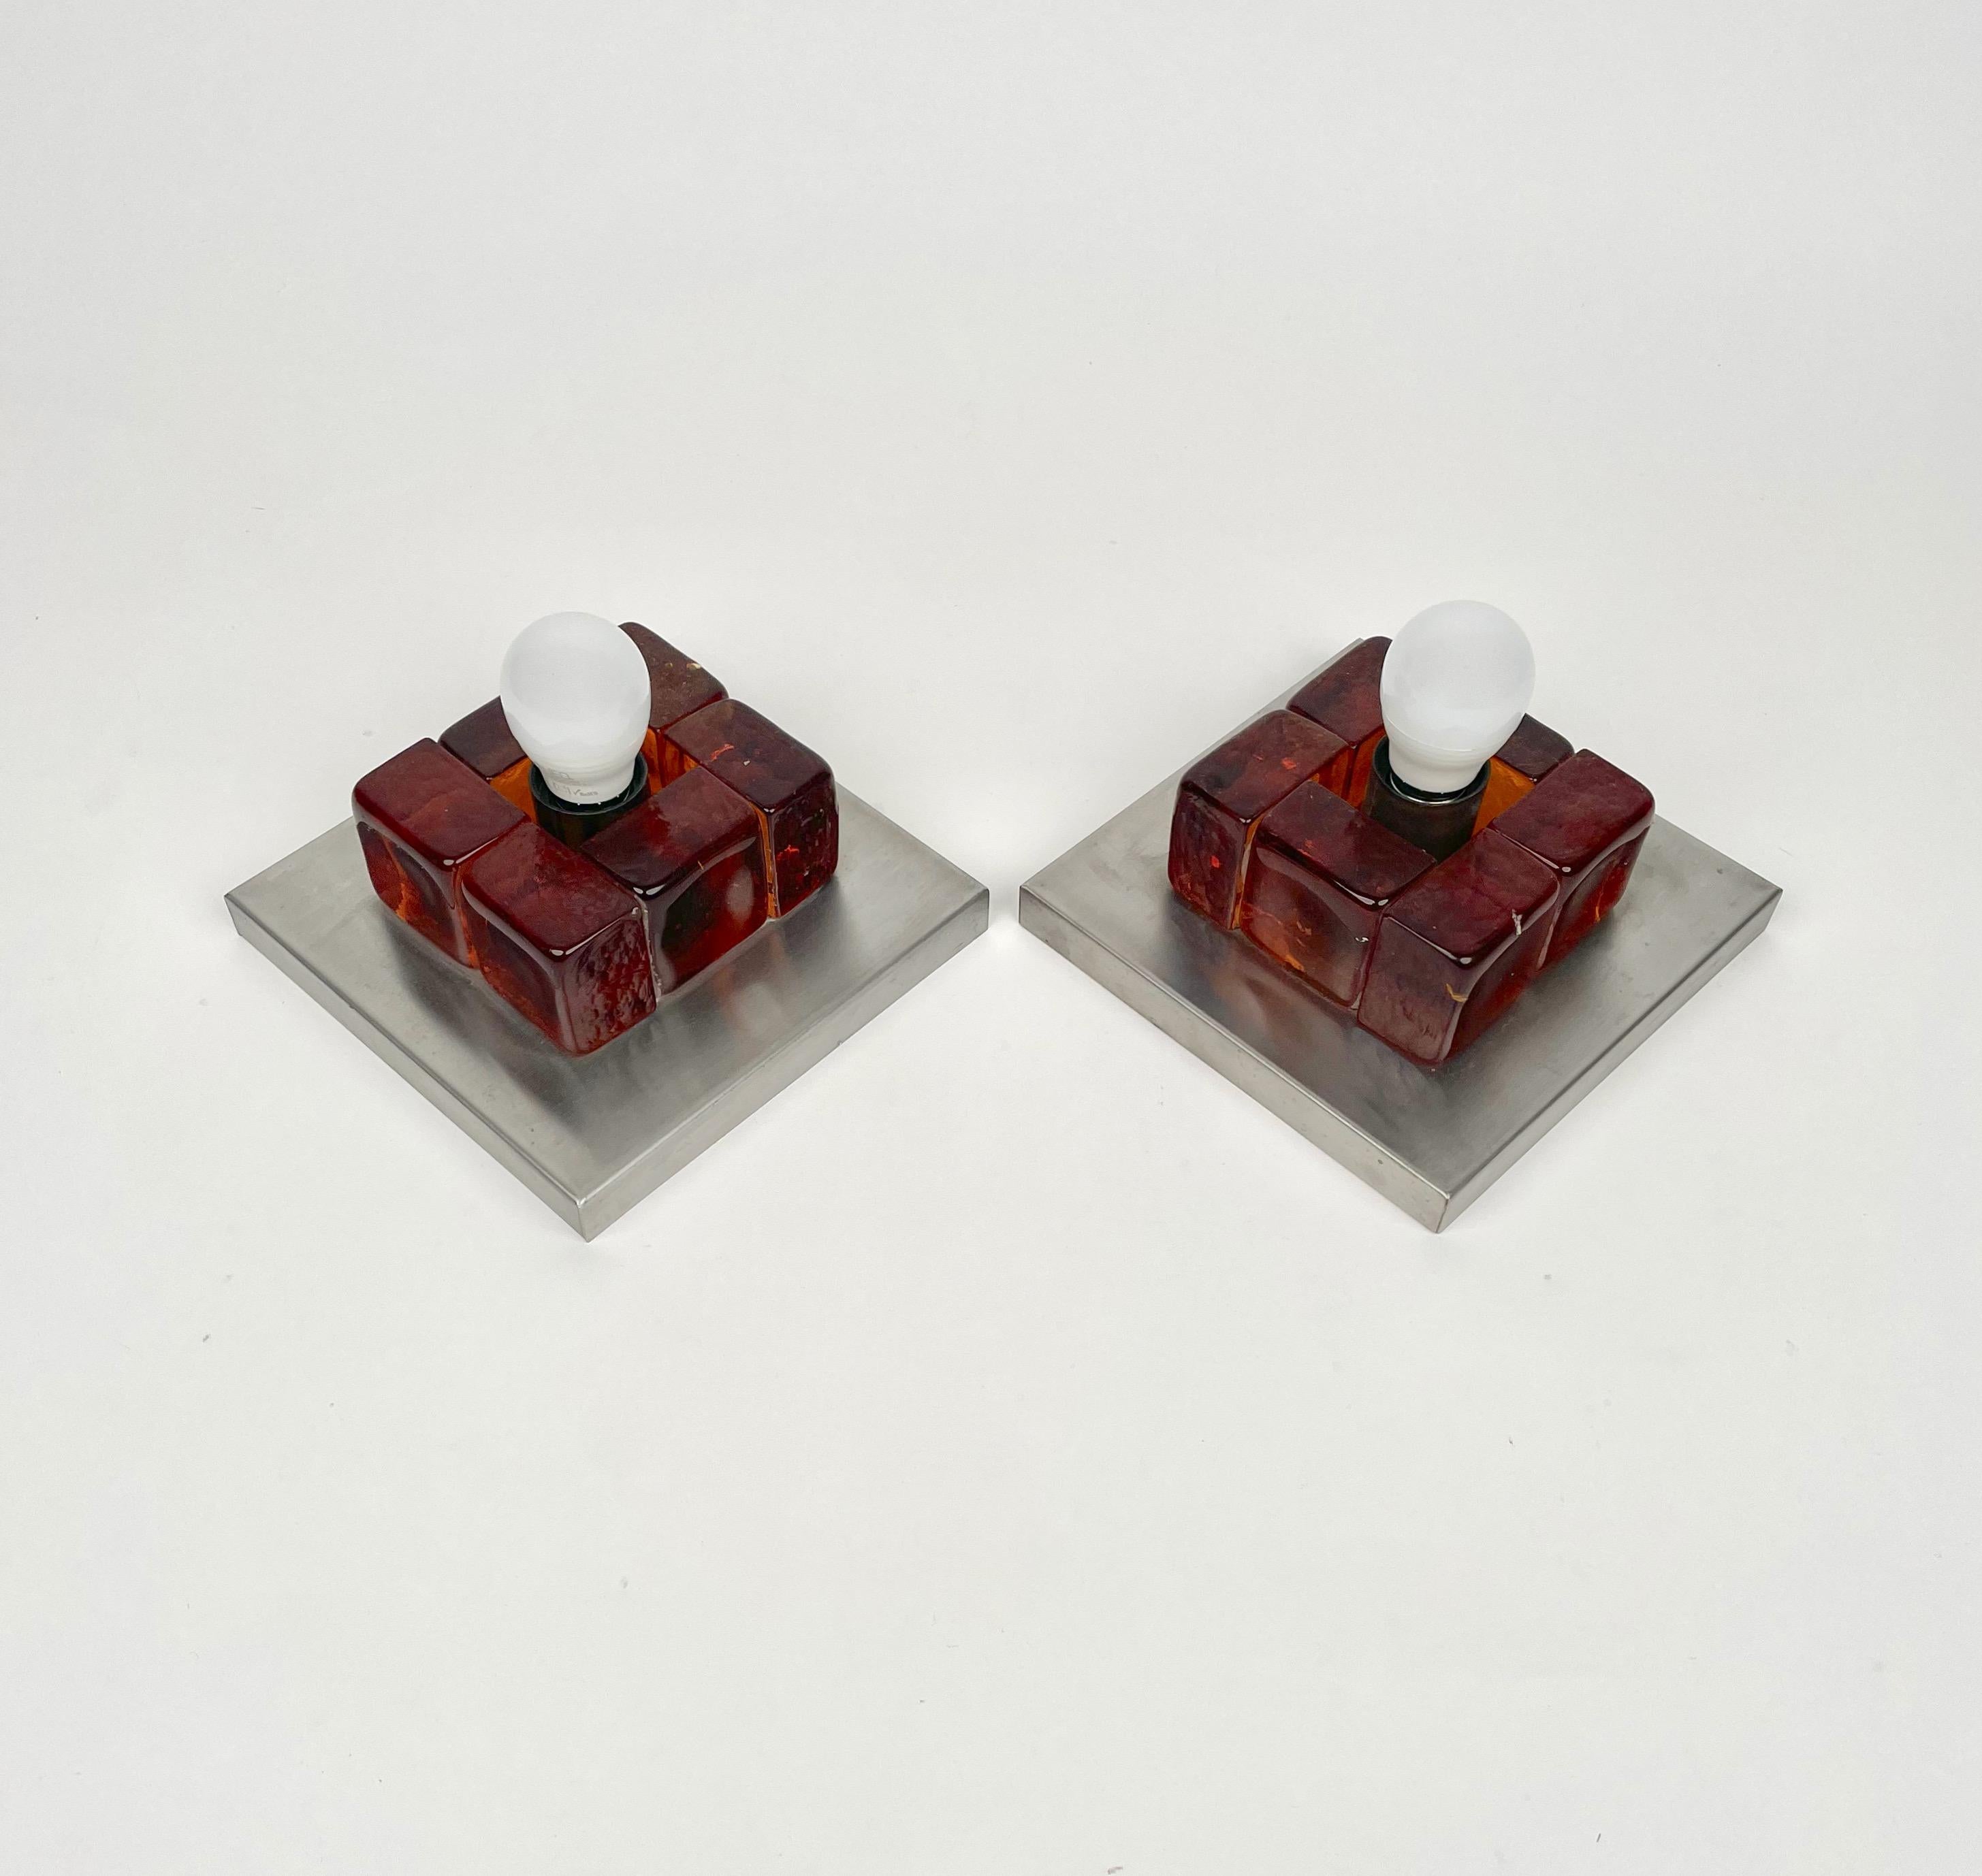 Pair of squared wall light sconces in Murano glass on a steel base by the Italian designer Albano Poli for Poliarte. 

Made in Italy in the 1970s.